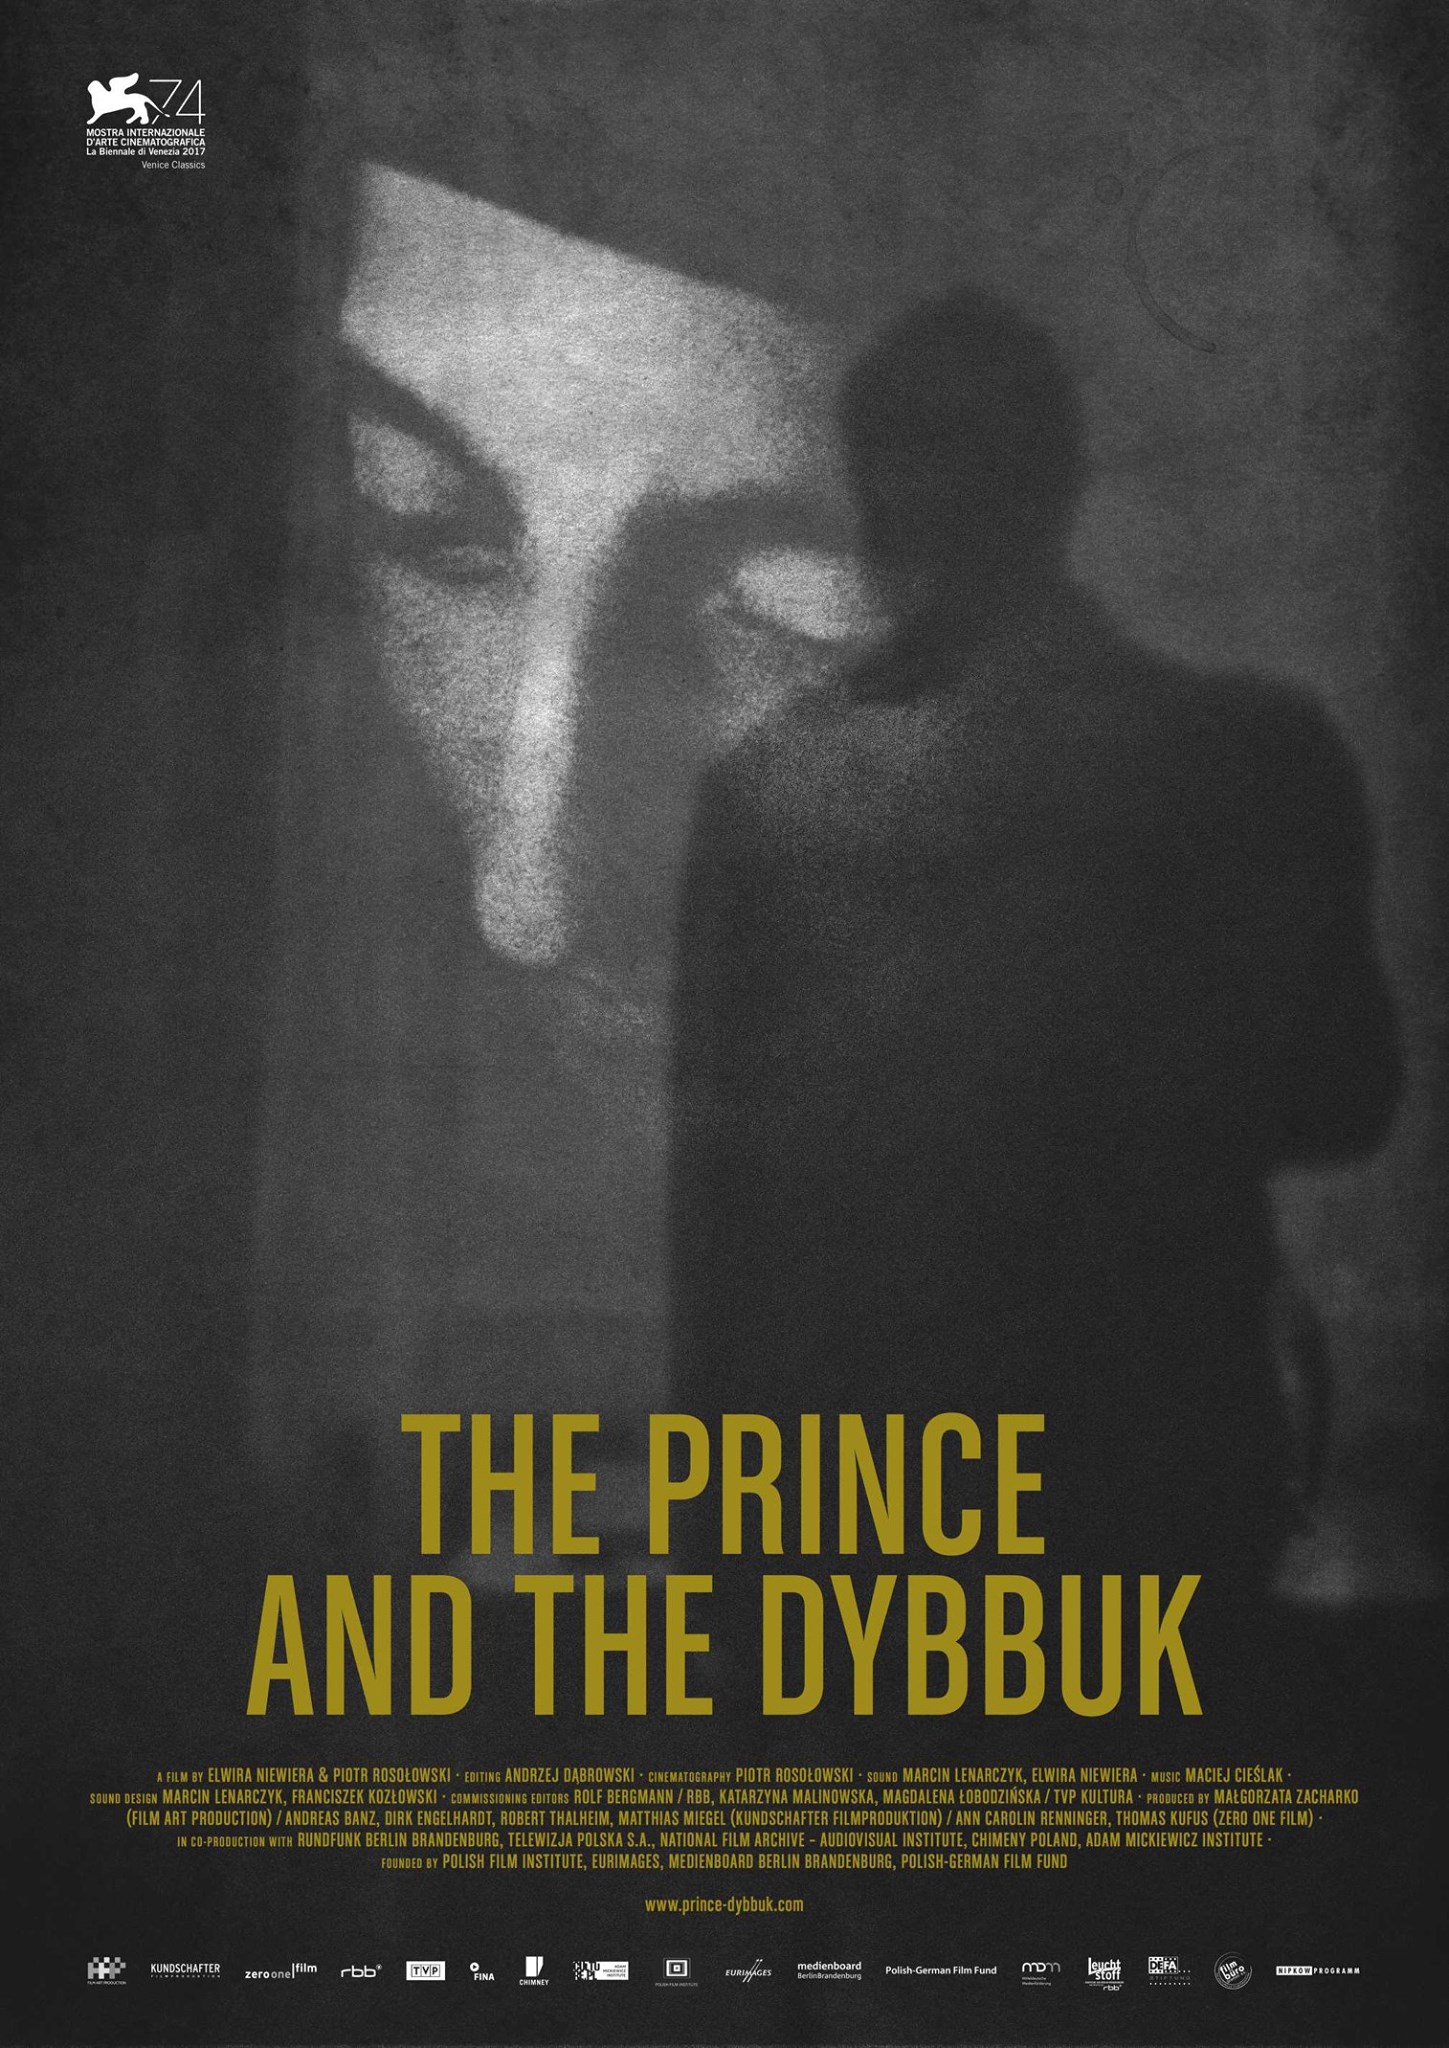 The Prince and the Dybbuk (2017) Screenshot 1 